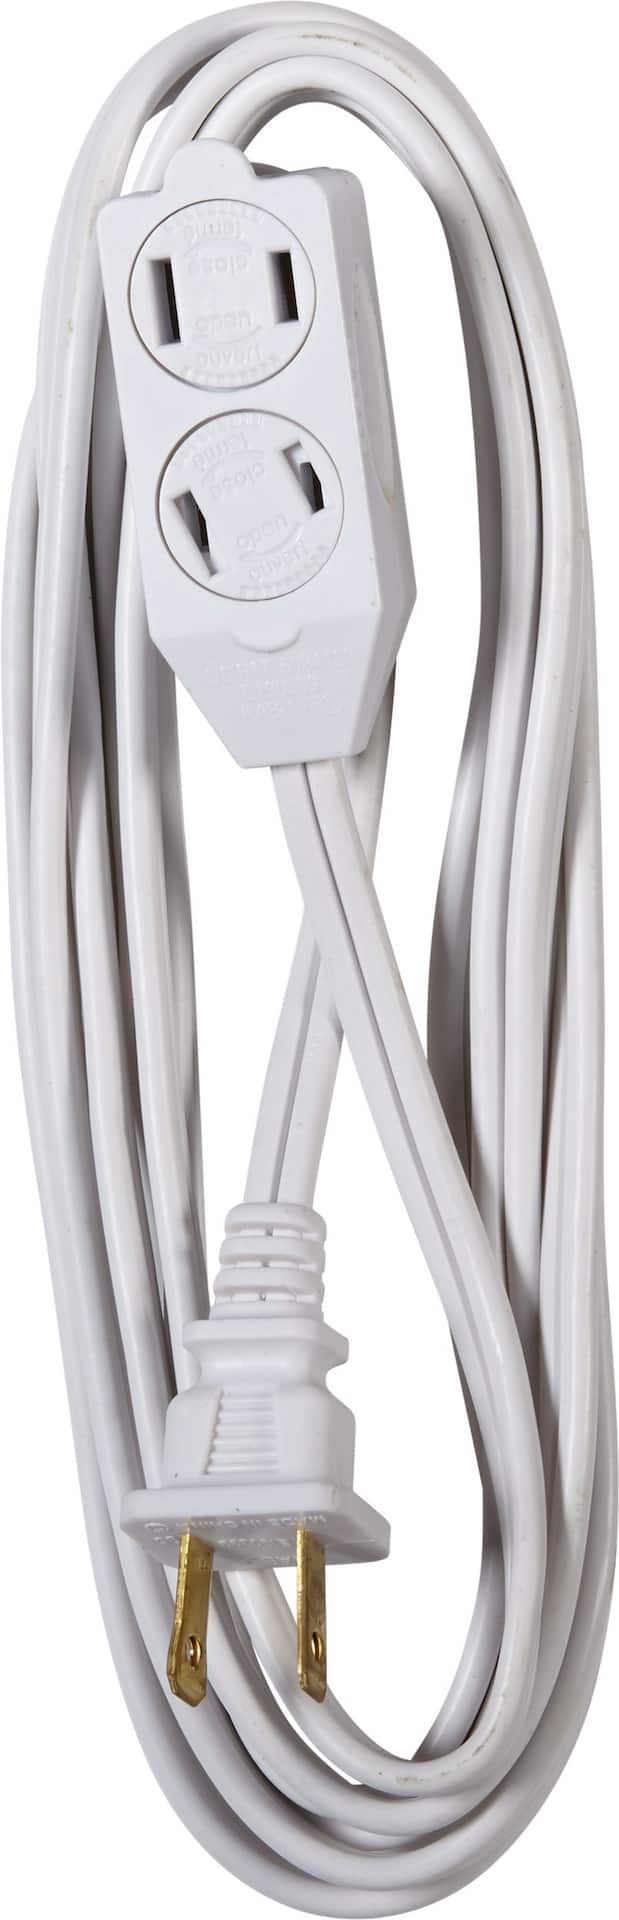 https://media-www.canadiantire.ca/product/fixing/electrical/power-bars-extension-cords-timers/0522444/noma-white-9-10-3m-outdoor-cord-16-2-3-tap-8f3e62fb-f730-4551-9c6d-f074b684ab51-jpgrendition.jpg